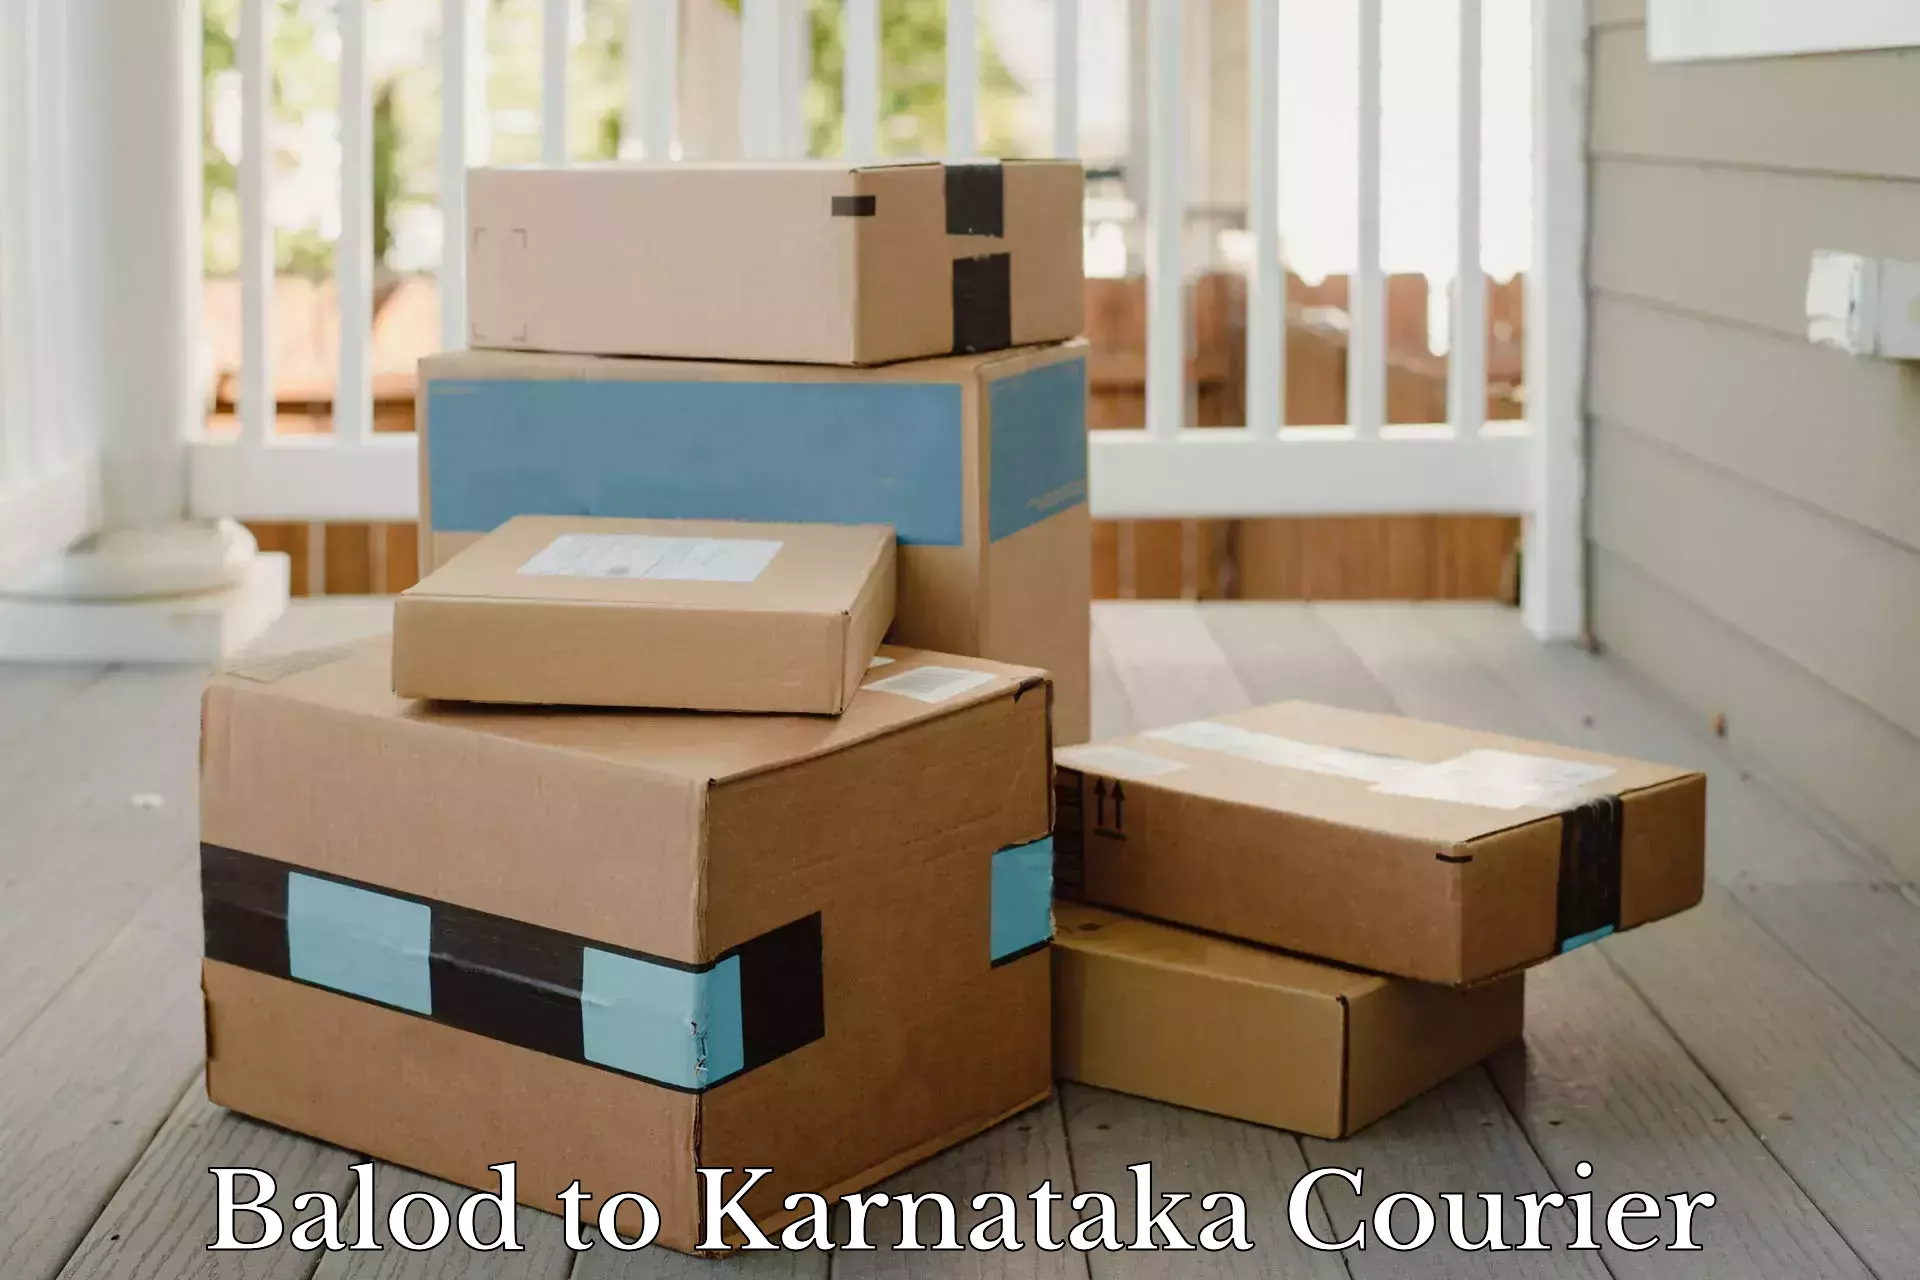 Subscription-based courier Balod to Mangalore Port